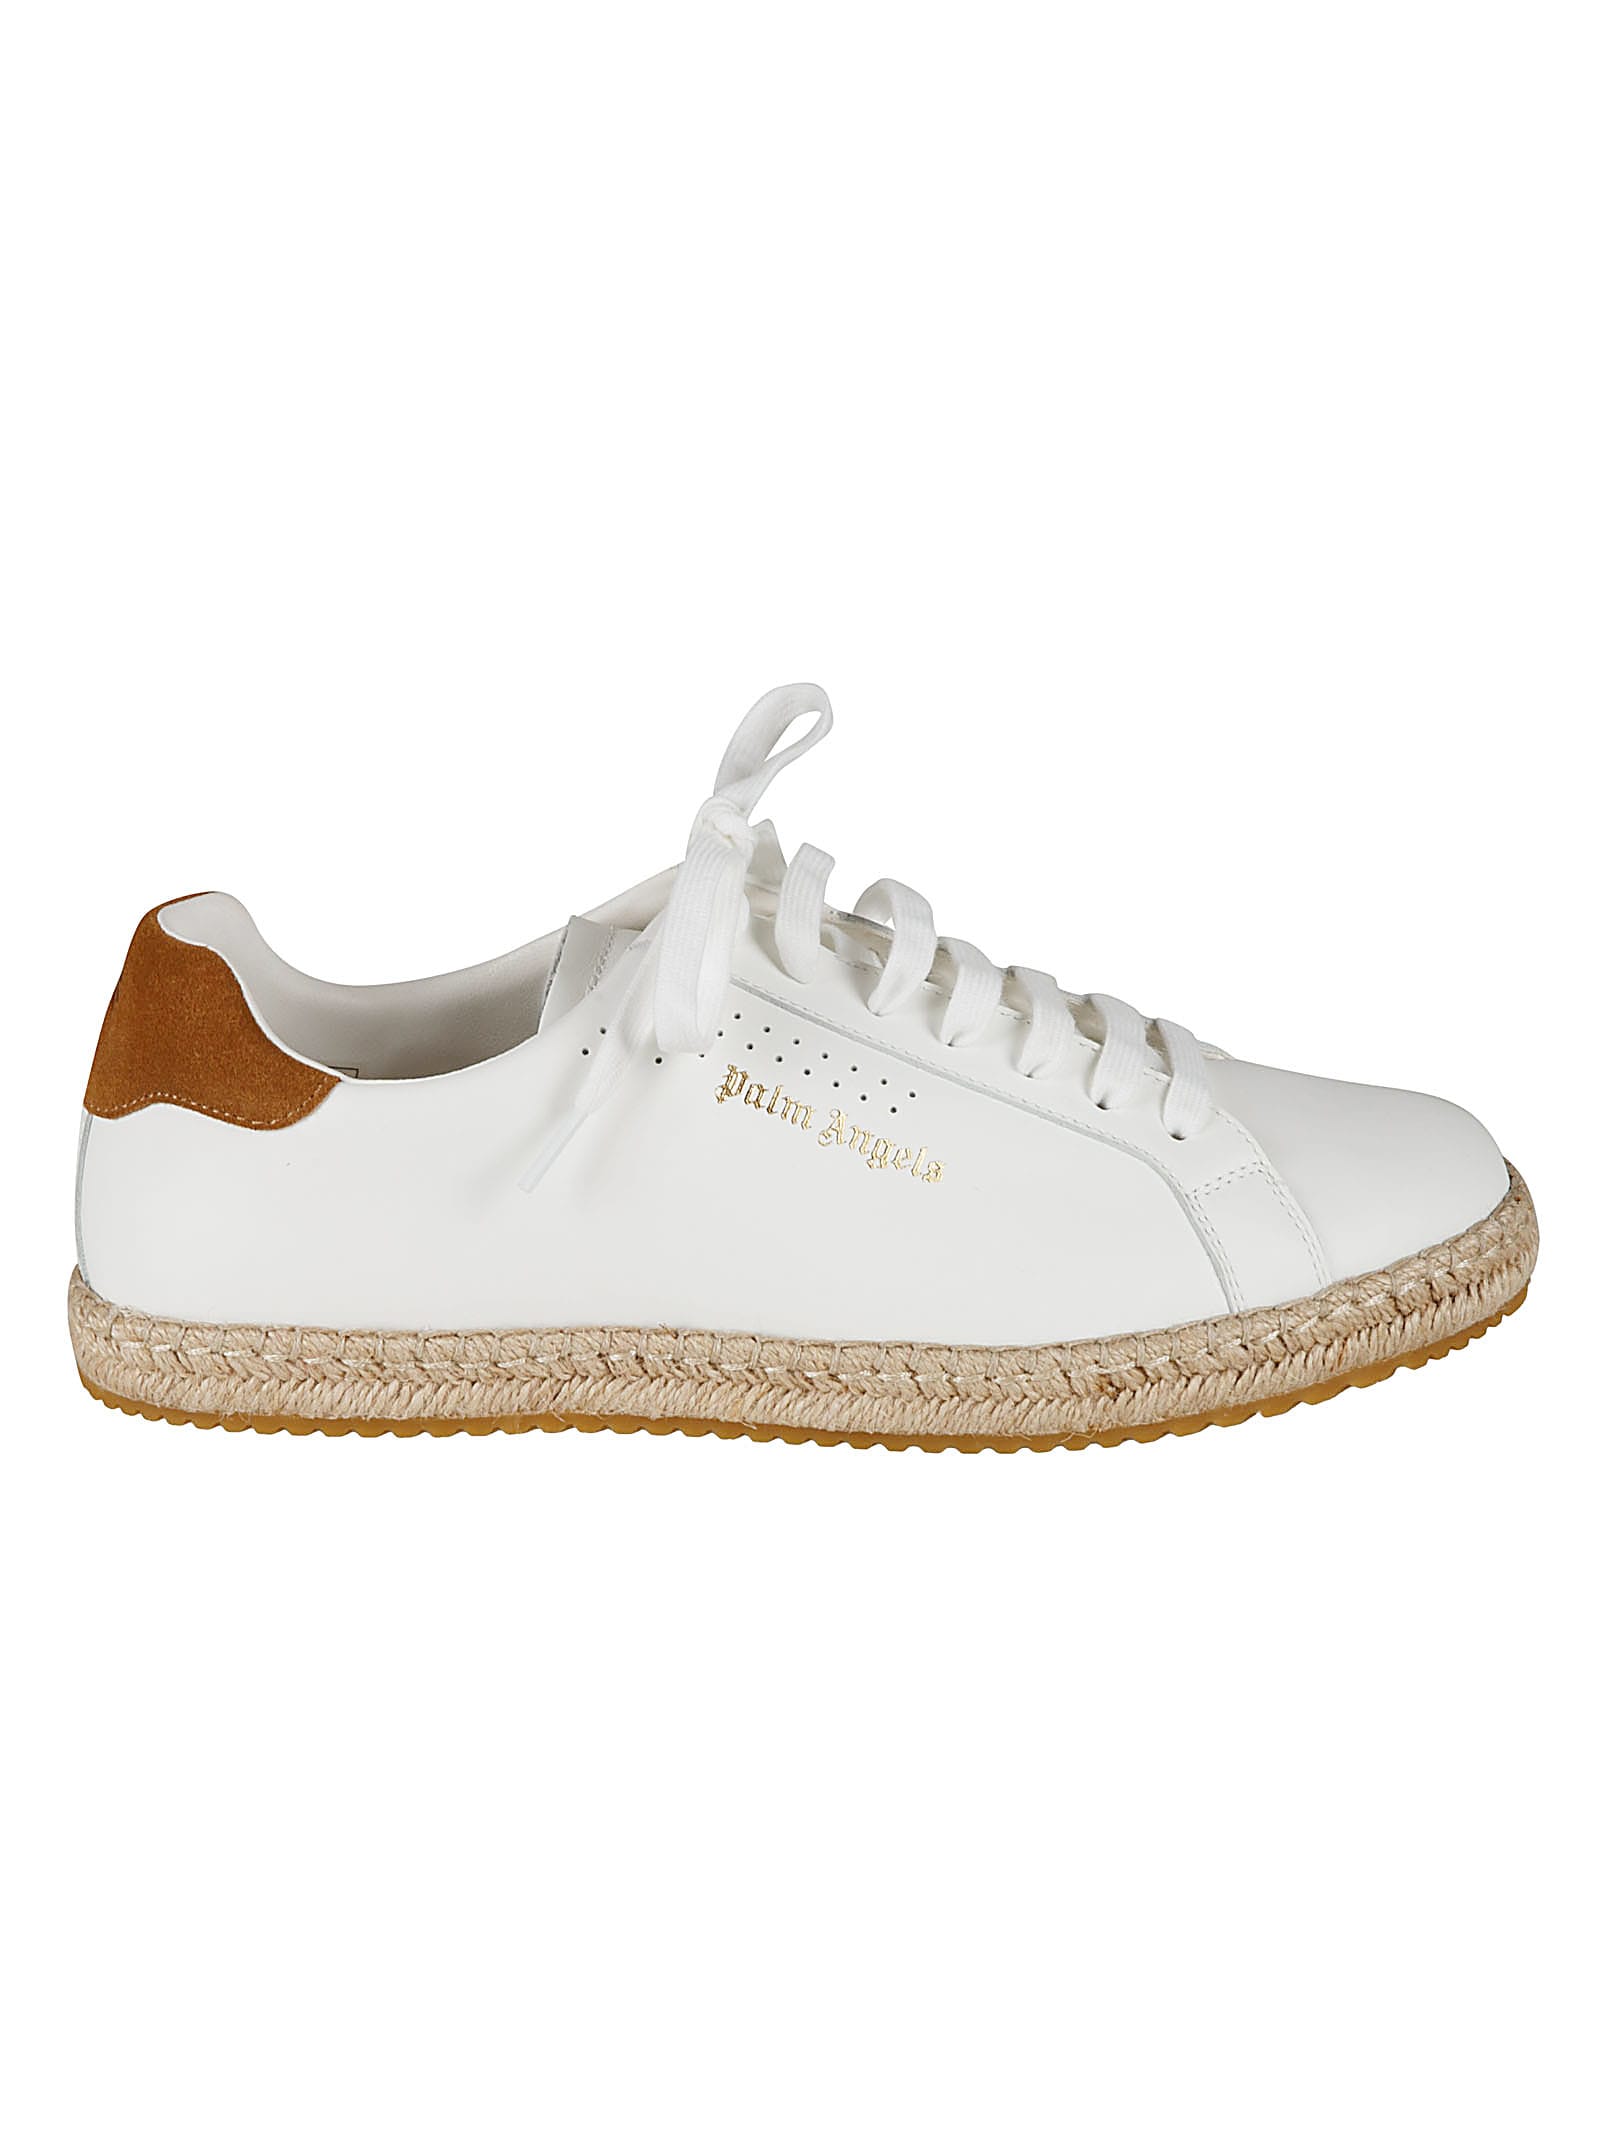 Palm Angels Palm 1 Lace-up Sneakers